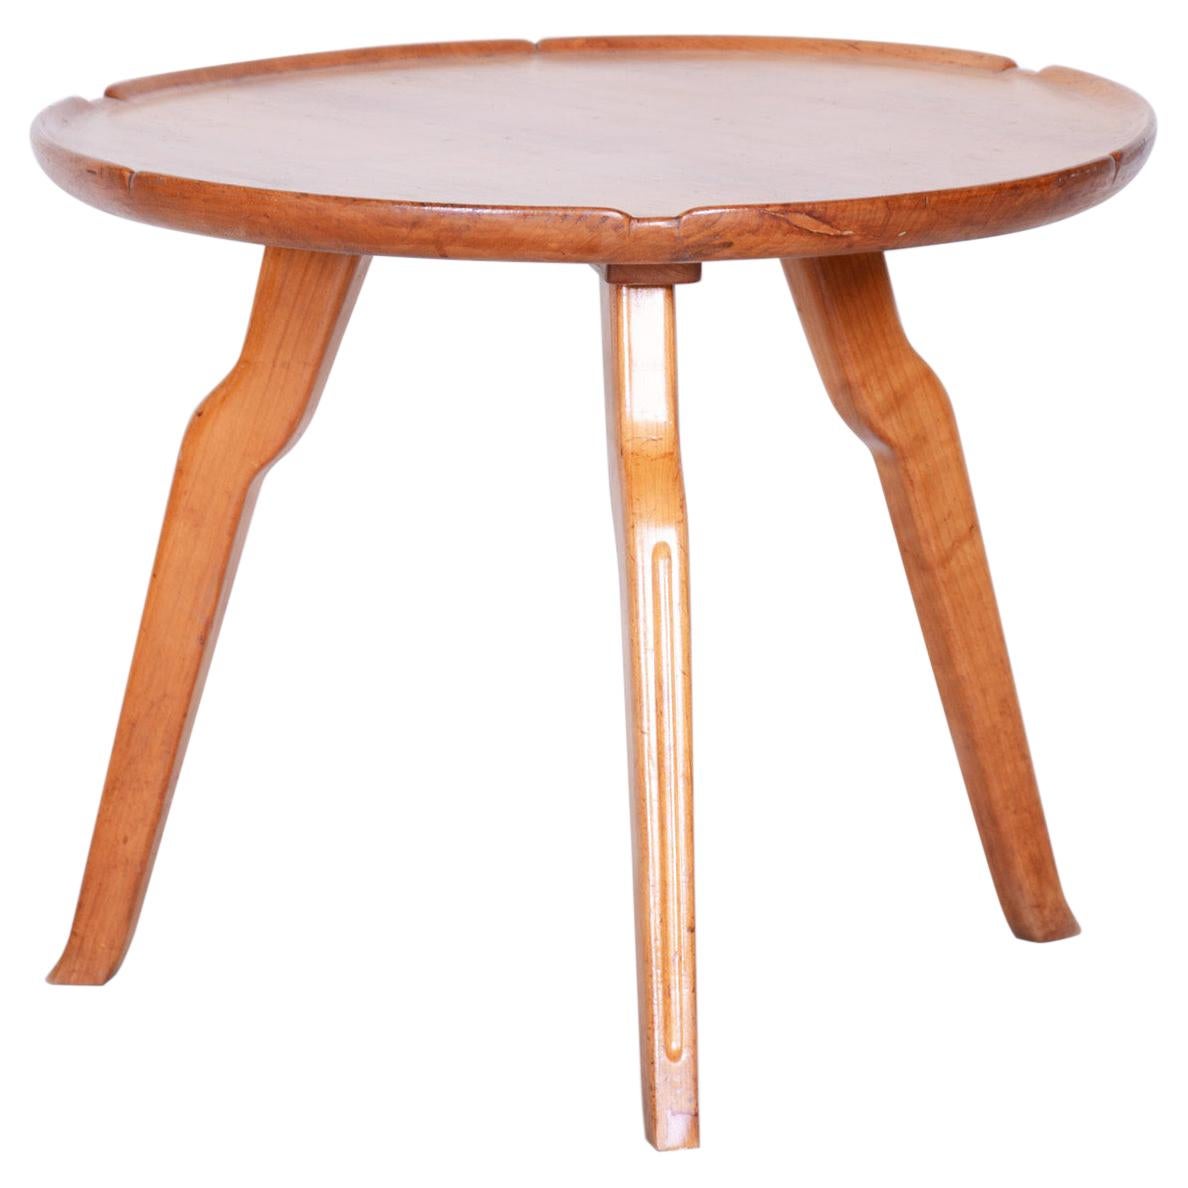 Small Brown Round Table, Czech Midcentury, Made Out of Cherry Tree, 1940s